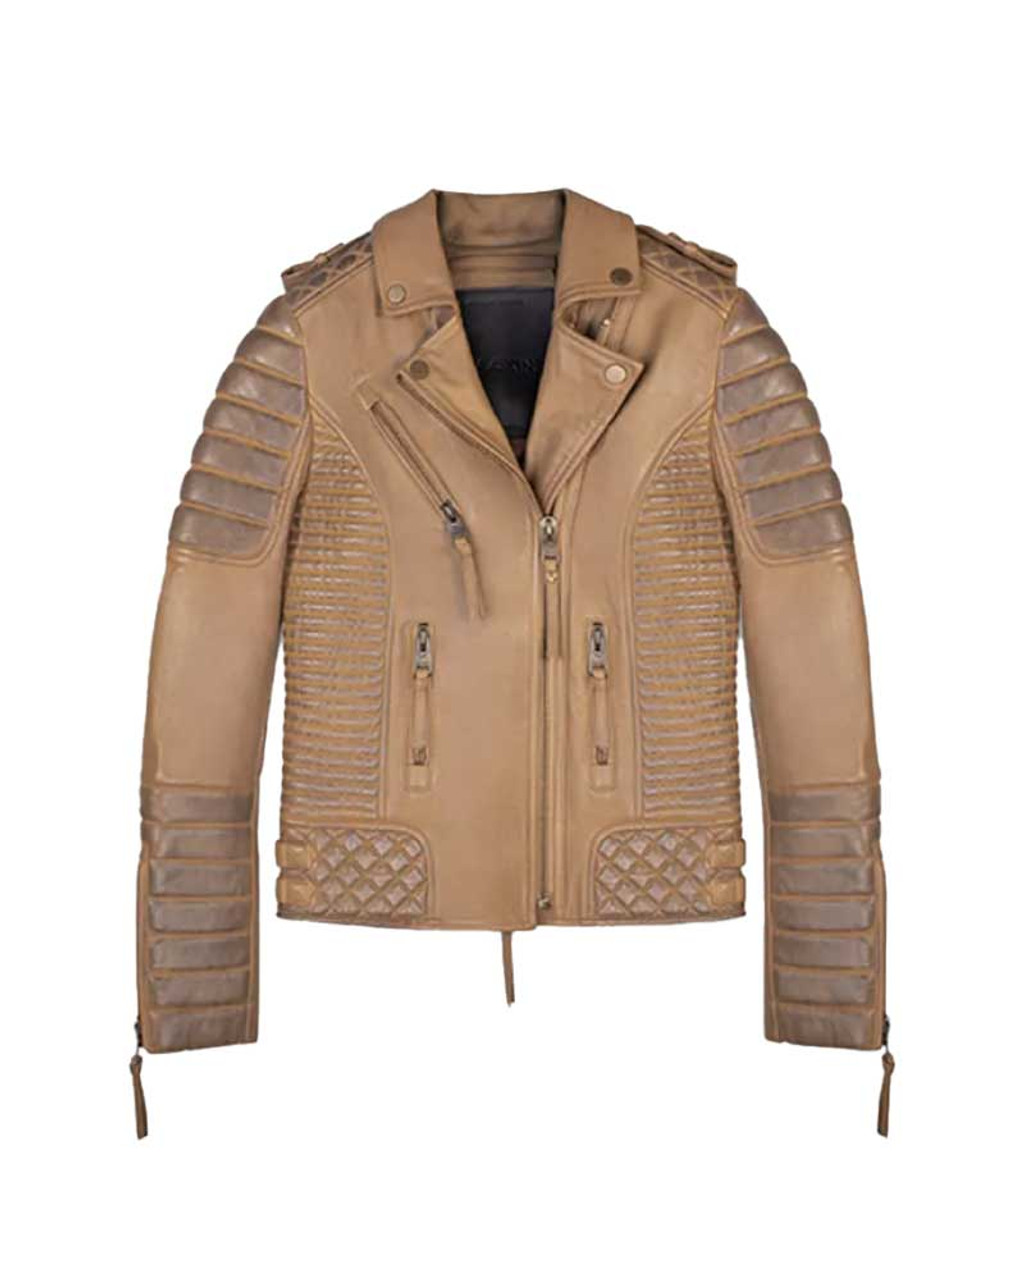 Fast X 2023 Michelle Rodriguez Quilted Leather Jacket